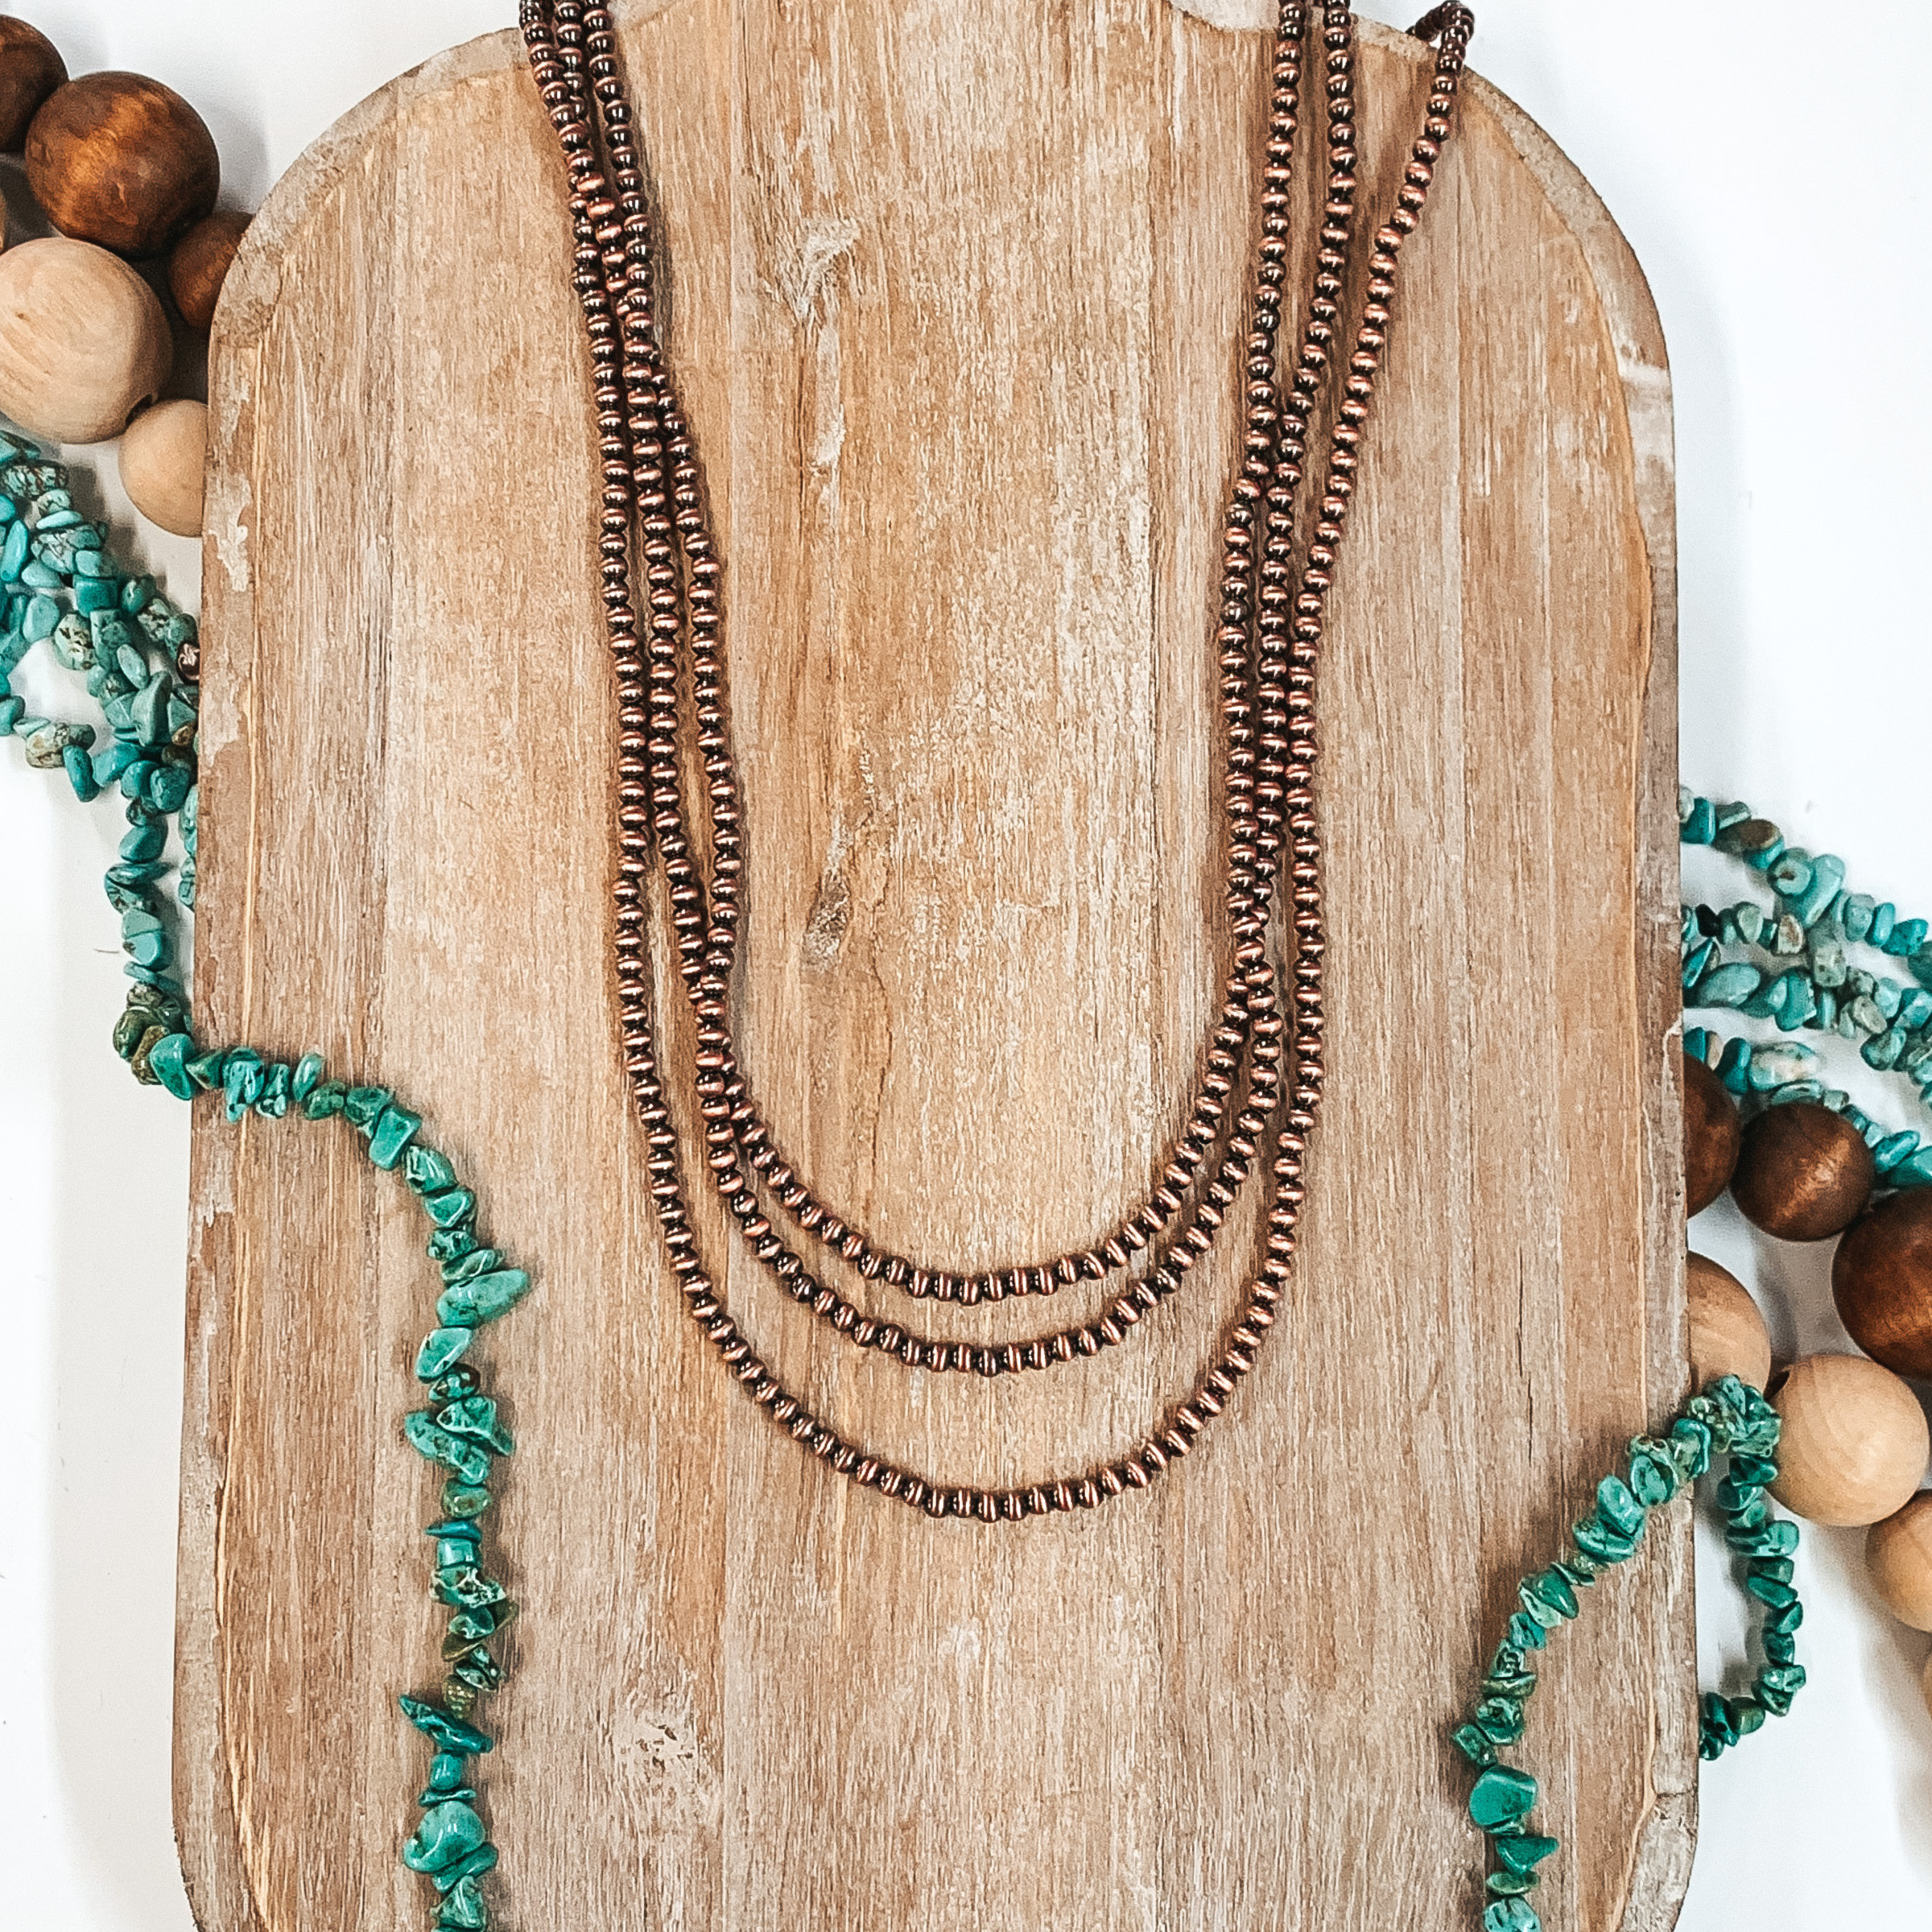 Three Strands of Long Faux Navajo Pearls in Copper Tone - Giddy Up Glamour Boutique